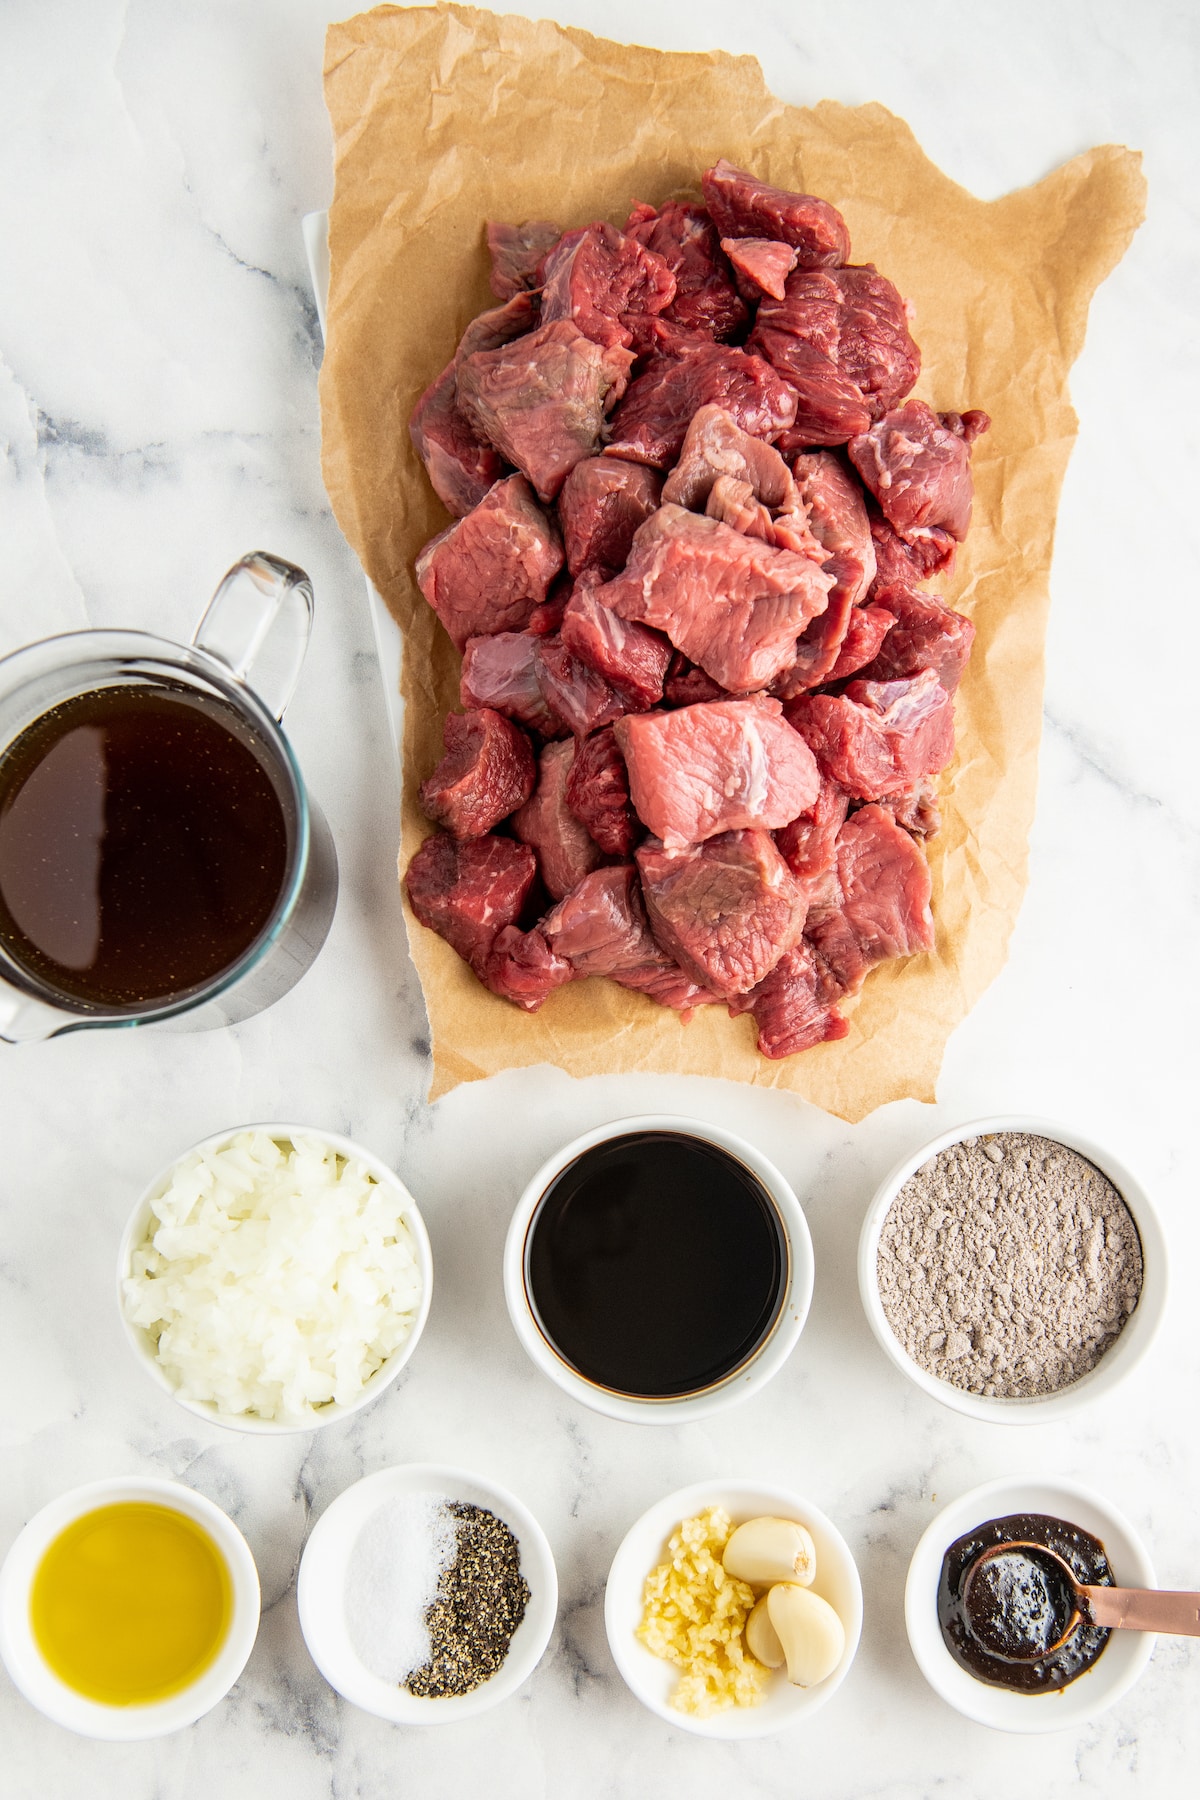 Ingredients in white bowls and beef cut into pieces on parchment paper.